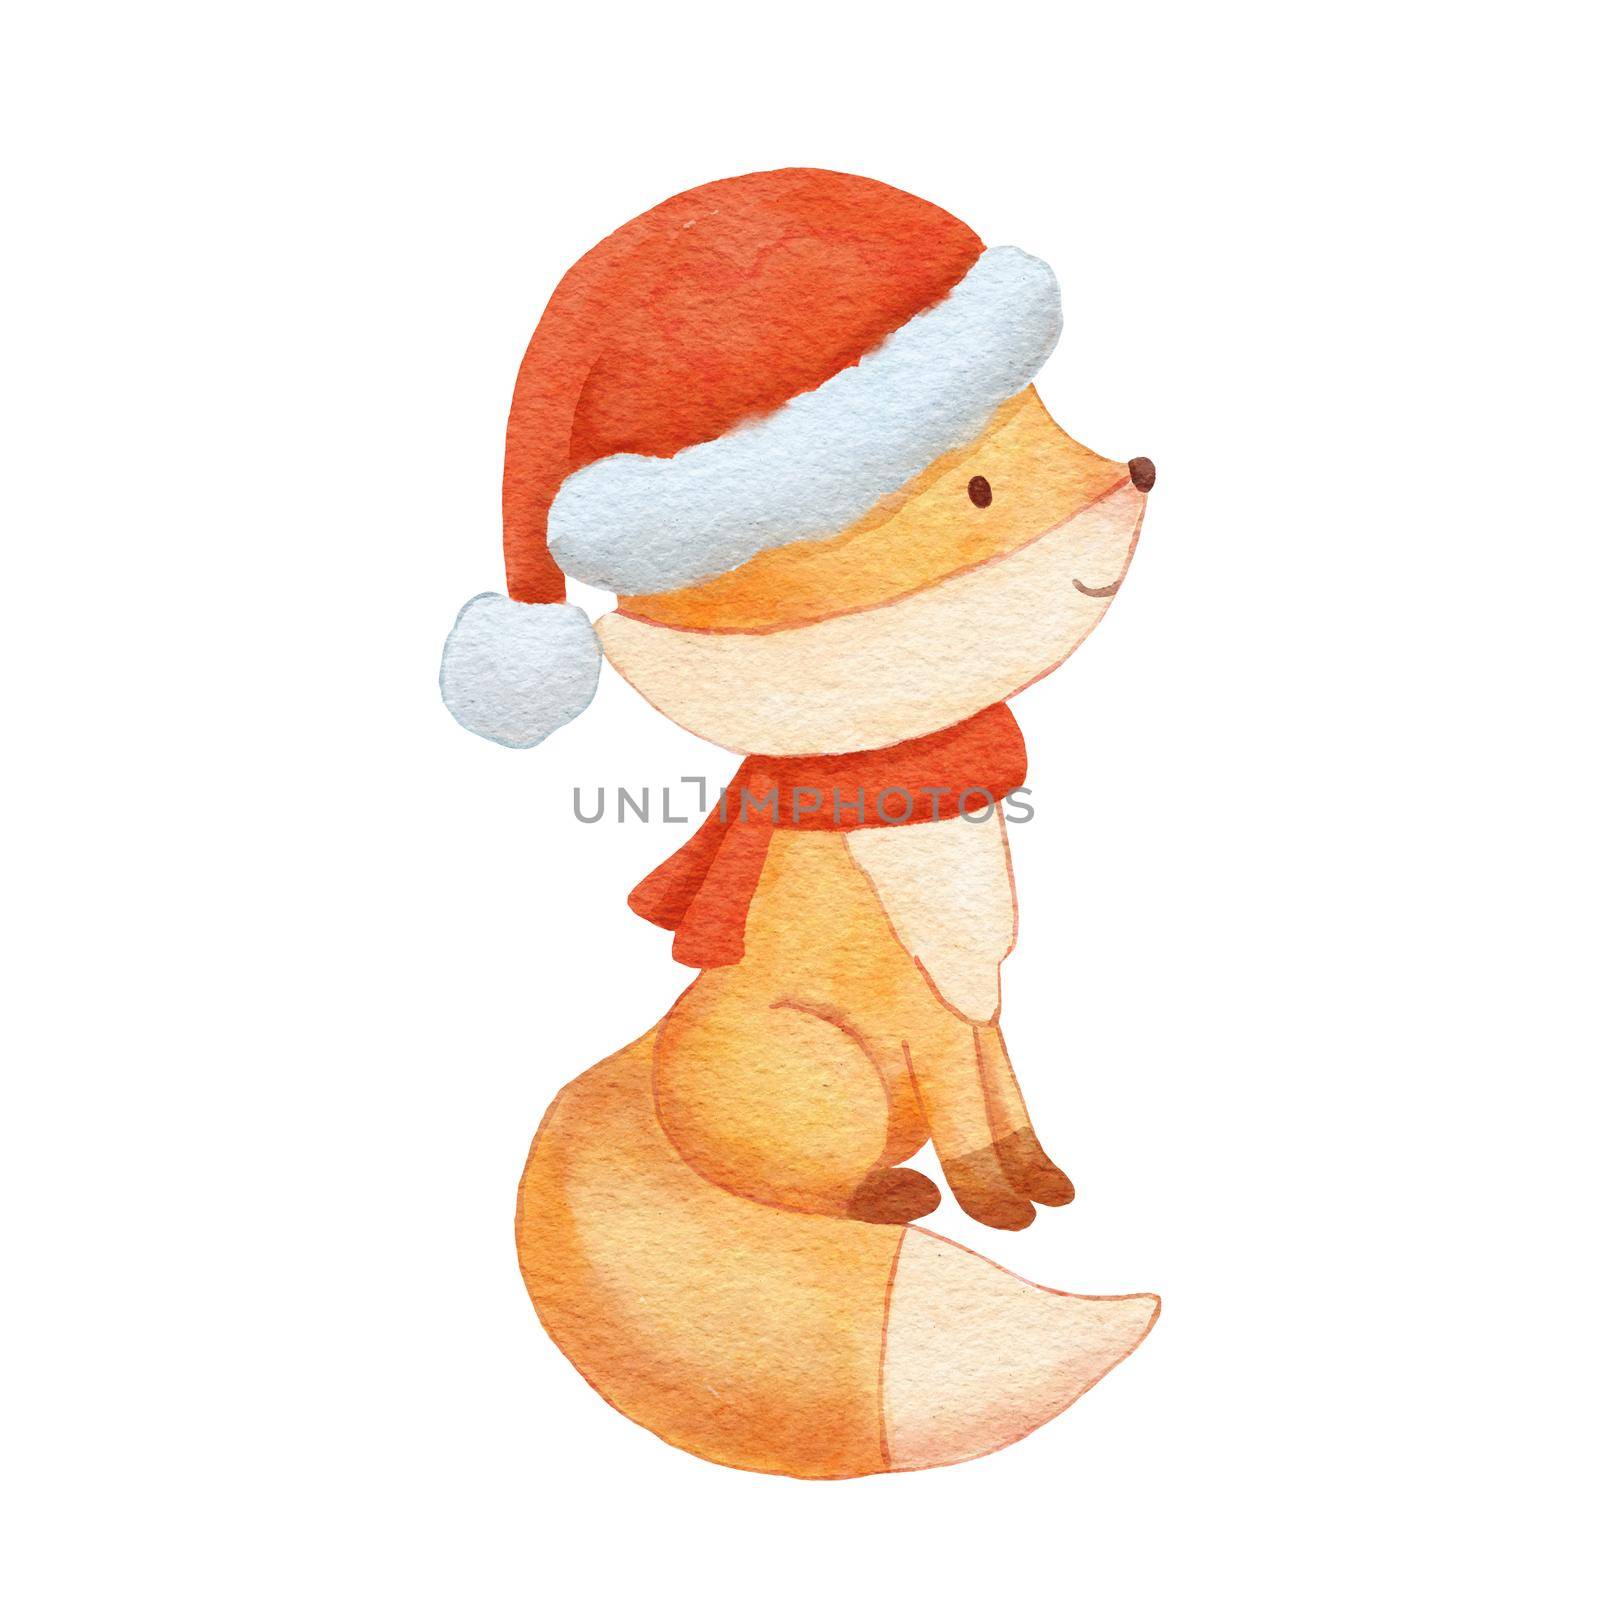 Watercolor Baby fox character with winter scarf and hat. Hand drawn cute woodland animal. Cartoon illustration isolated on white.